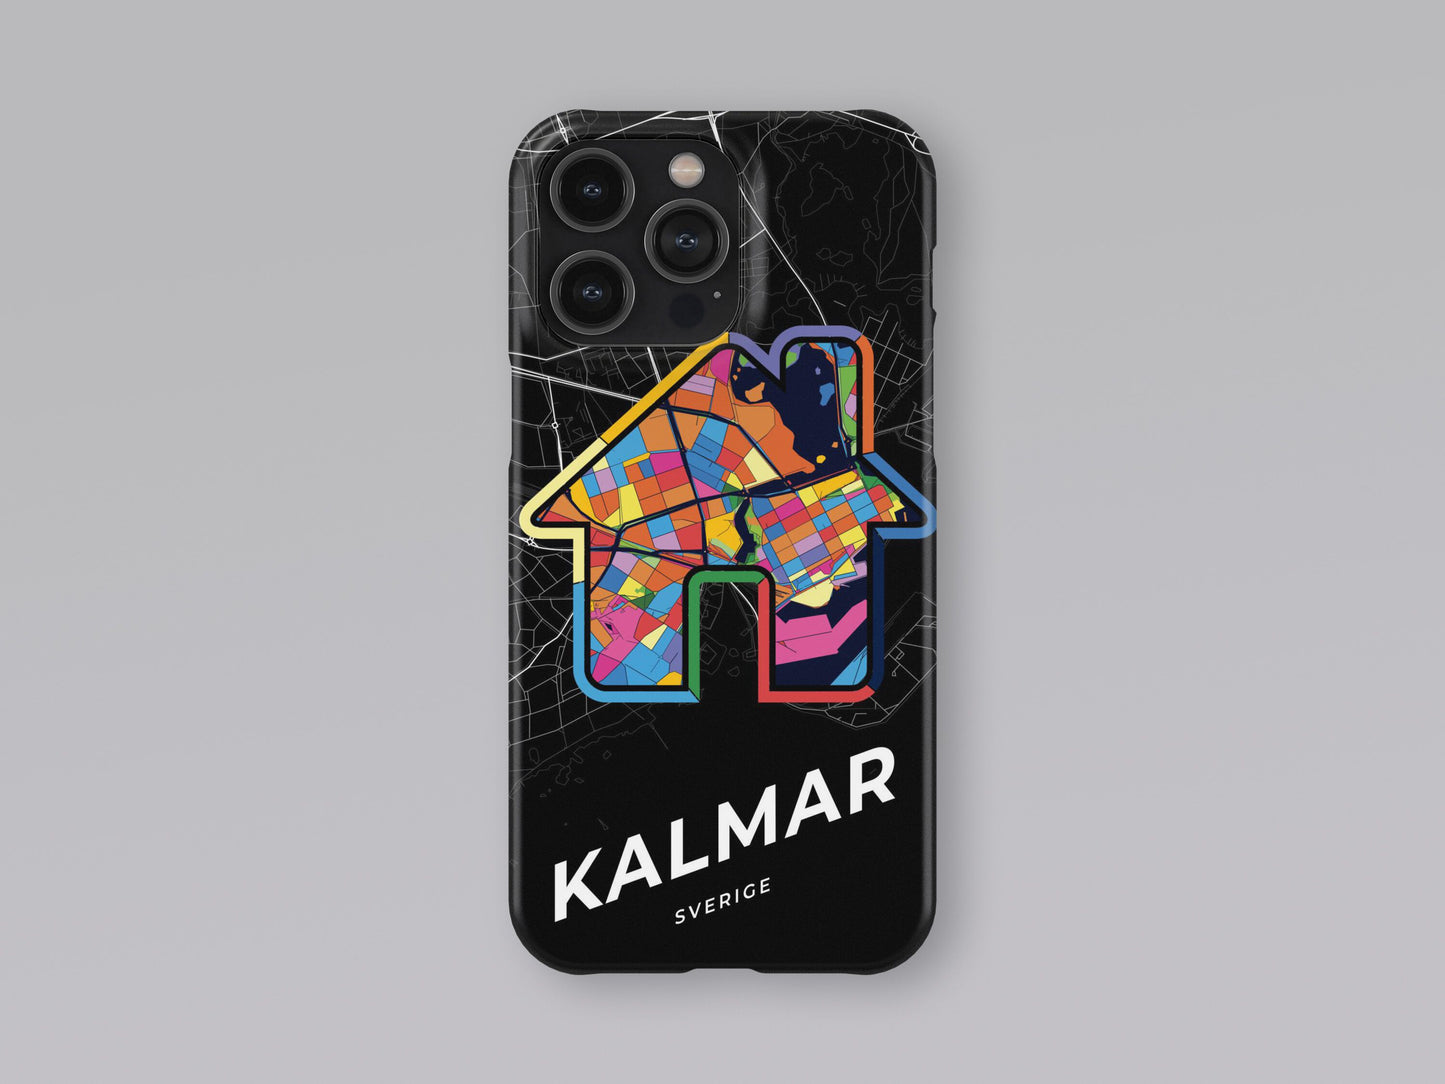 Kalmar Sweden slim phone case with colorful icon. Birthday, wedding or housewarming gift. Couple match cases. 3